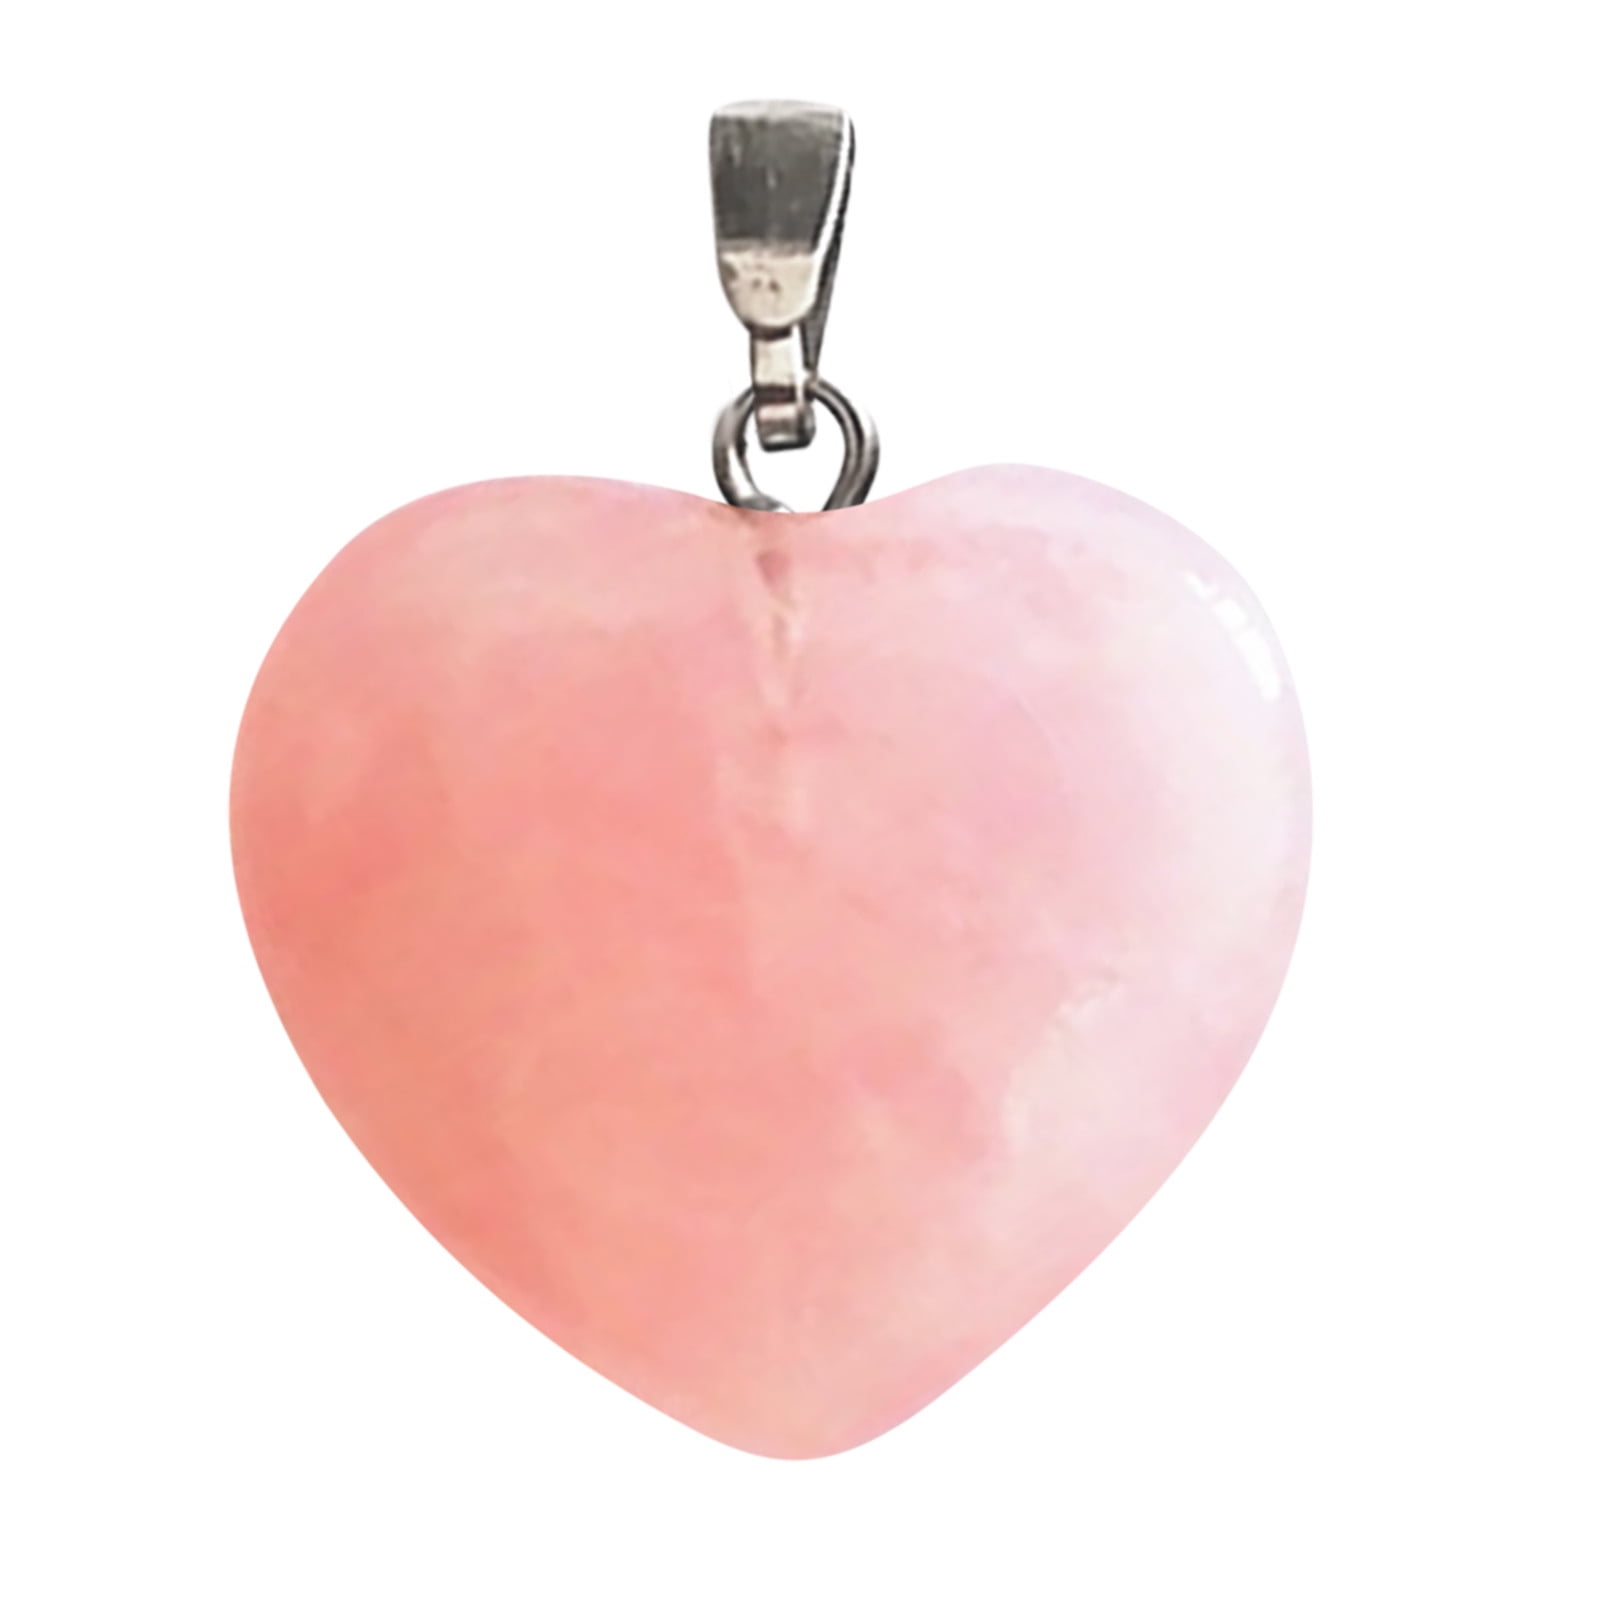 Pendant small heart in natural stone of pink quartz